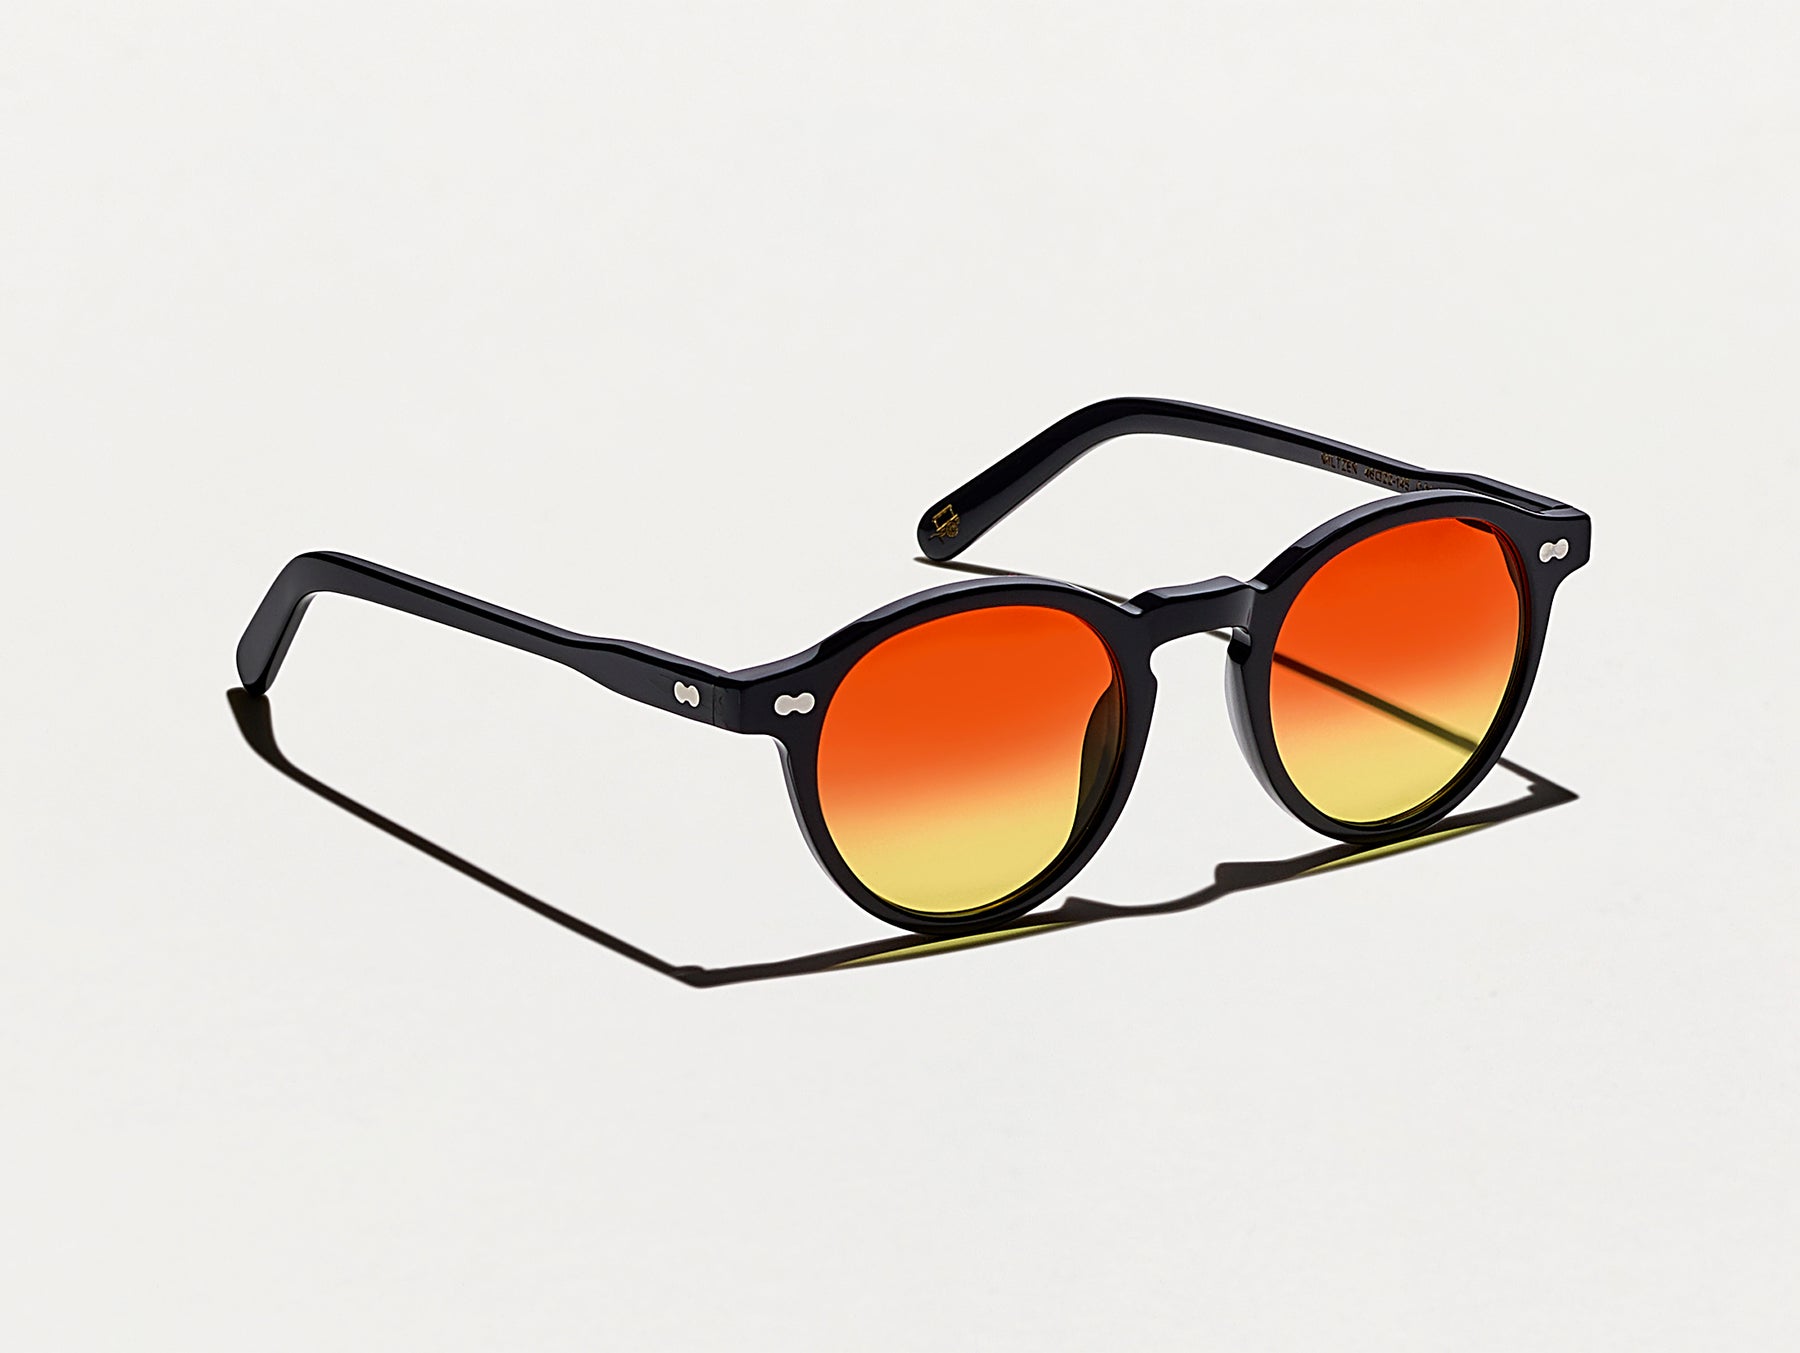 The MILTZEN Black with Candy Corn Tinted Lenses